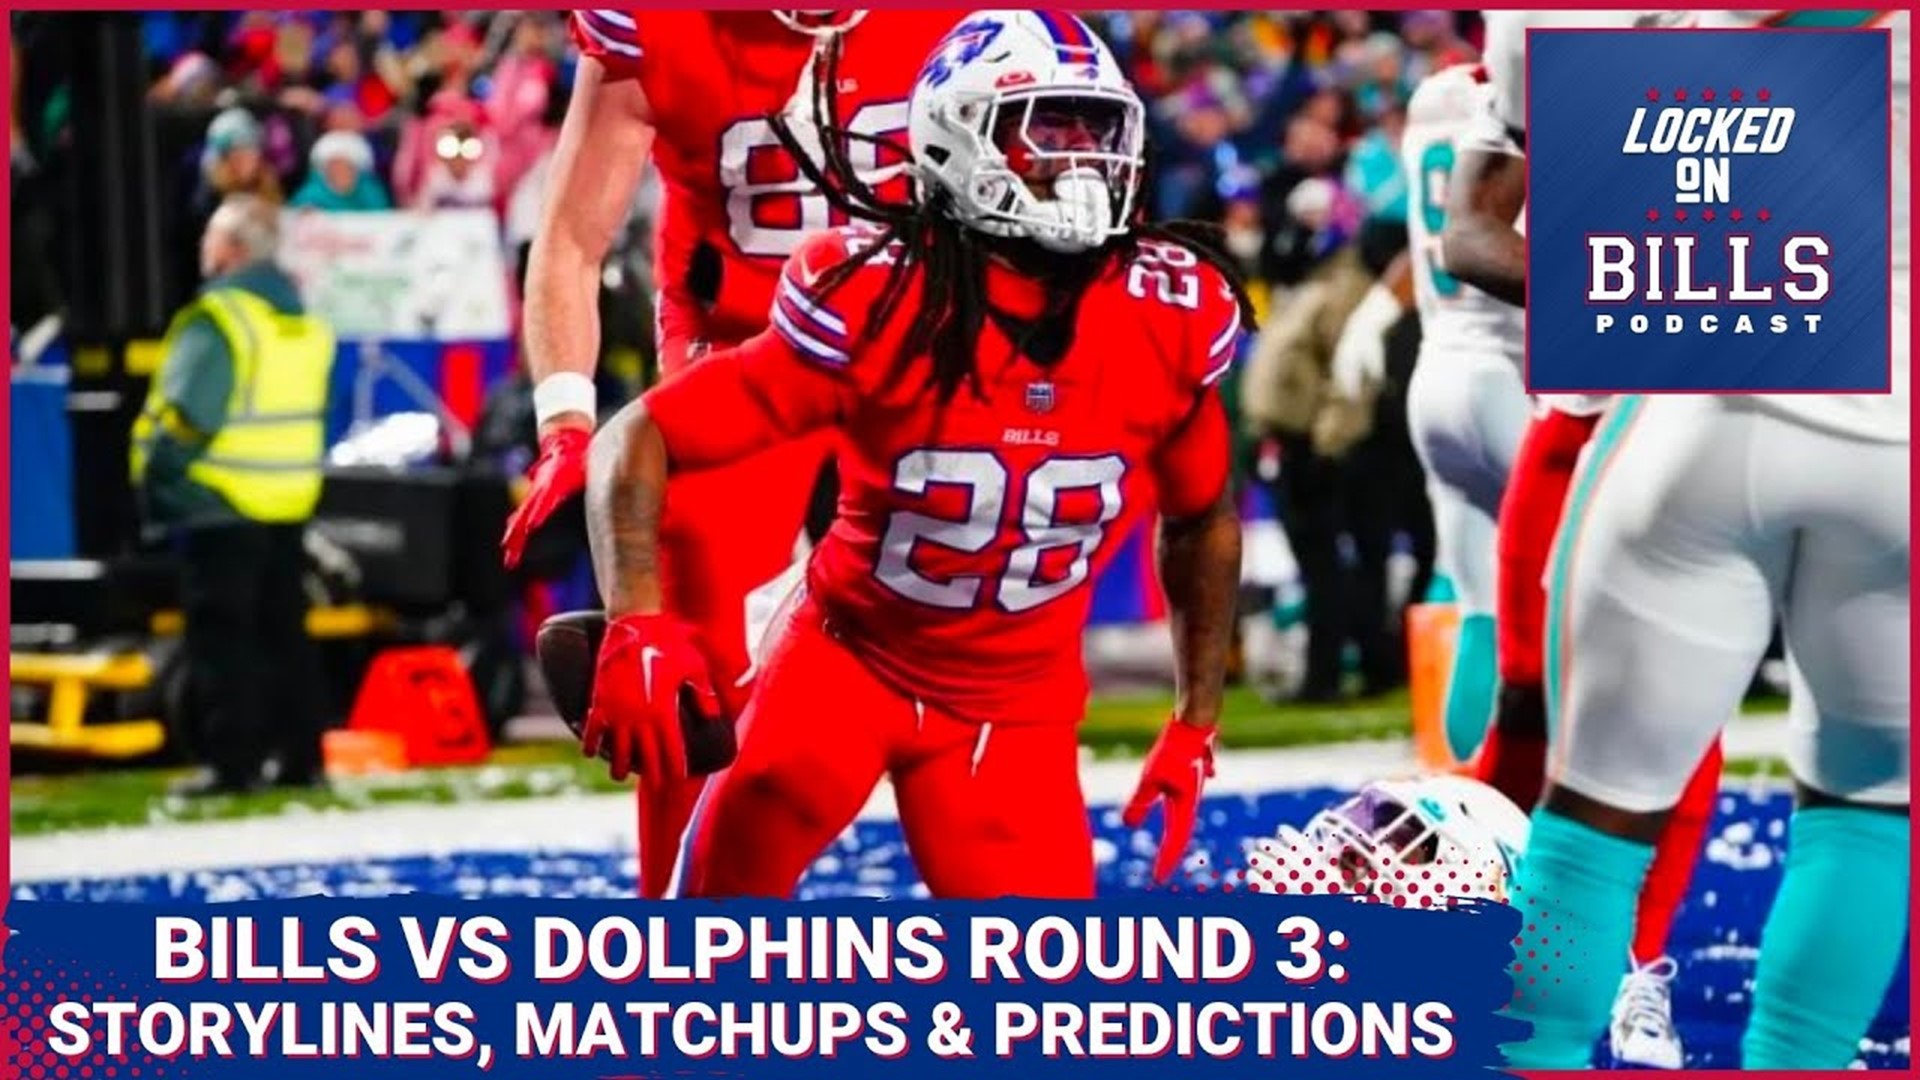 Buffalo Bills vs Miami Dolphins Round 3 Top Storylines, Matchups and